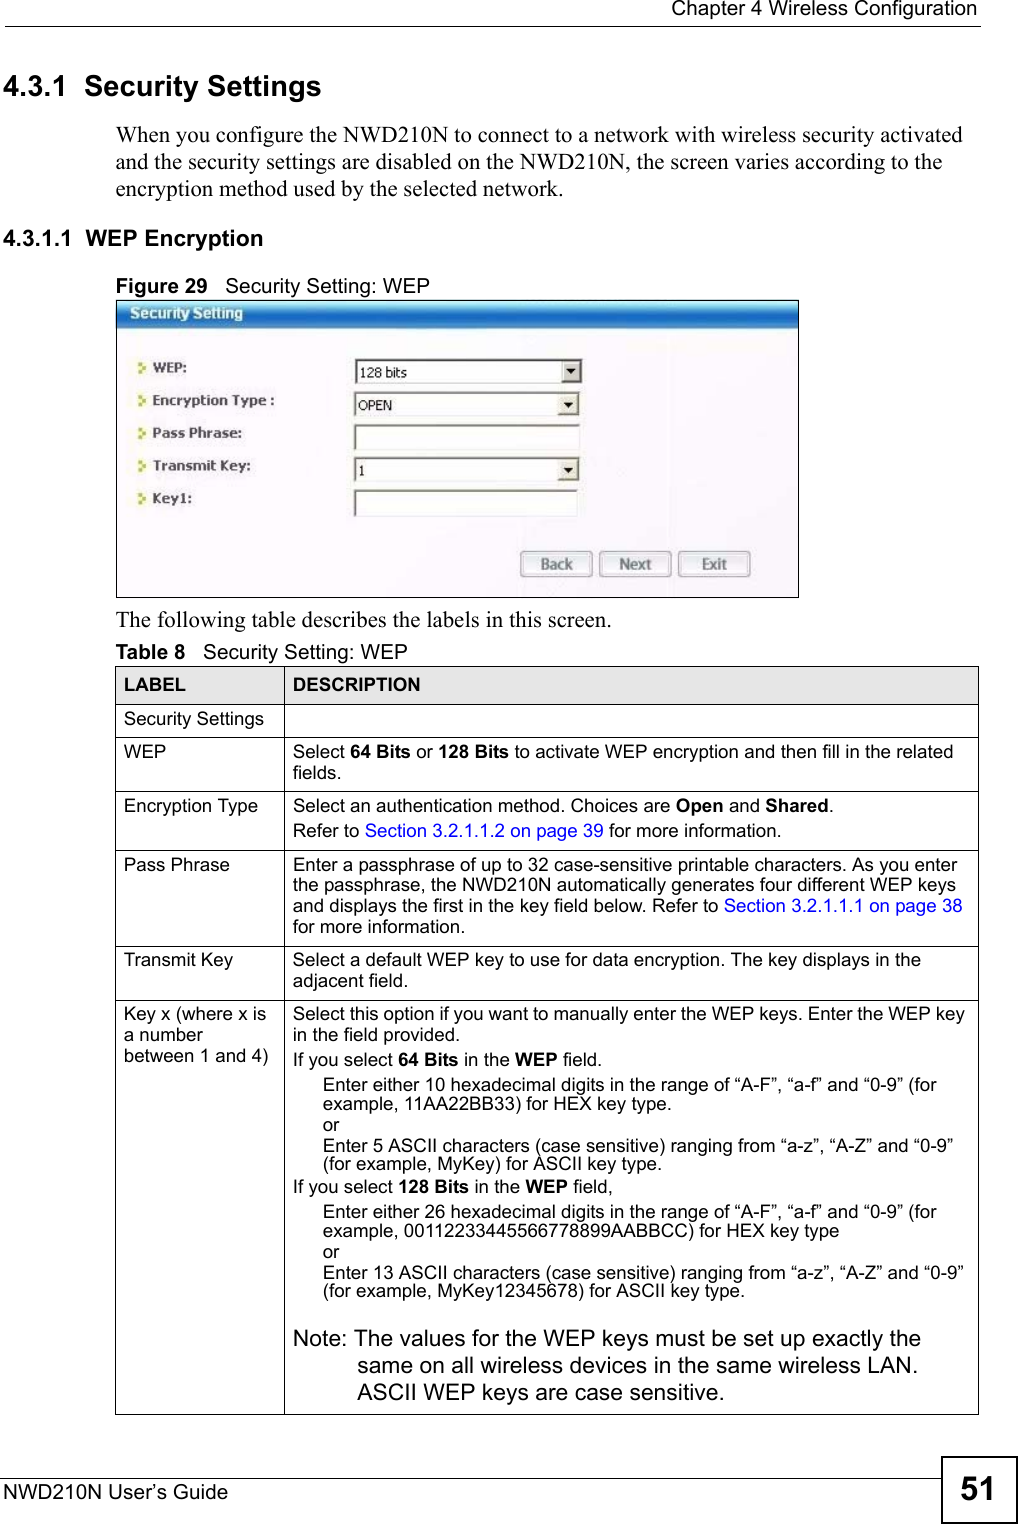  Chapter 4 Wireless ConfigurationNWD210N User’s Guide 514.3.1  Security Settings When you configure the NWD210N to connect to a network with wireless security activated and the security settings are disabled on the NWD210N, the screen varies according to the encryption method used by the selected network.4.3.1.1  WEP EncryptionFigure 29   Security Setting: WEP  The following table describes the labels in this screen.  Table 8   Security Setting: WEP LABEL DESCRIPTIONSecurity SettingsWEP Select 64 Bits or 128 Bits to activate WEP encryption and then fill in the related fields.Encryption Type Select an authentication method. Choices are Open and Shared.Refer to Section 3.2.1.1.2 on page 39 for more information.Pass Phrase Enter a passphrase of up to 32 case-sensitive printable characters. As you enter the passphrase, the NWD210N automatically generates four different WEP keys and displays the first in the key field below. Refer to Section 3.2.1.1.1 on page 38 for more information.Transmit Key Select a default WEP key to use for data encryption. The key displays in the adjacent field.Key x (where x is a number between 1 and 4)Select this option if you want to manually enter the WEP keys. Enter the WEP key in the field provided.If you select 64 Bits in the WEP field.Enter either 10 hexadecimal digits in the range of “A-F”, “a-f” and “0-9” (for example, 11AA22BB33) for HEX key type.orEnter 5 ASCII characters (case sensitive) ranging from “a-z”, “A-Z” and “0-9” (for example, MyKey) for ASCII key type. If you select 128 Bits in the WEP field,Enter either 26 hexadecimal digits in the range of “A-F”, “a-f” and “0-9” (for example, 00112233445566778899AABBCC) for HEX key typeorEnter 13 ASCII characters (case sensitive) ranging from “a-z”, “A-Z” and “0-9” (for example, MyKey12345678) for ASCII key type.Note: The values for the WEP keys must be set up exactly the same on all wireless devices in the same wireless LAN. ASCII WEP keys are case sensitive.